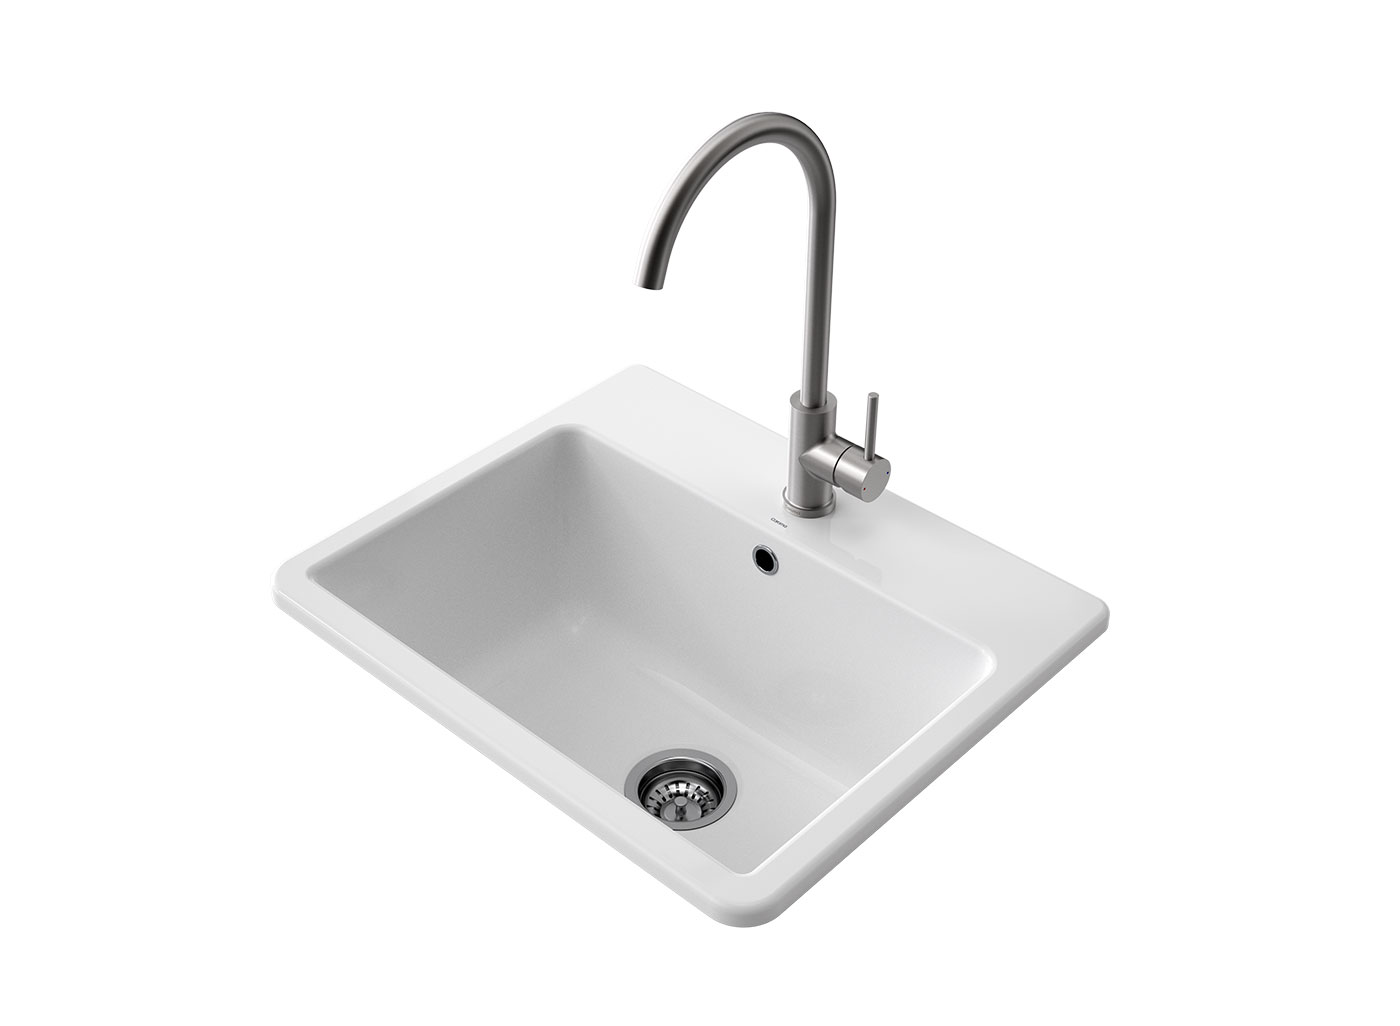 The Cubus Laundry Basin offers a contemporary rectangular style with distinctive clean lines. Made in Italy